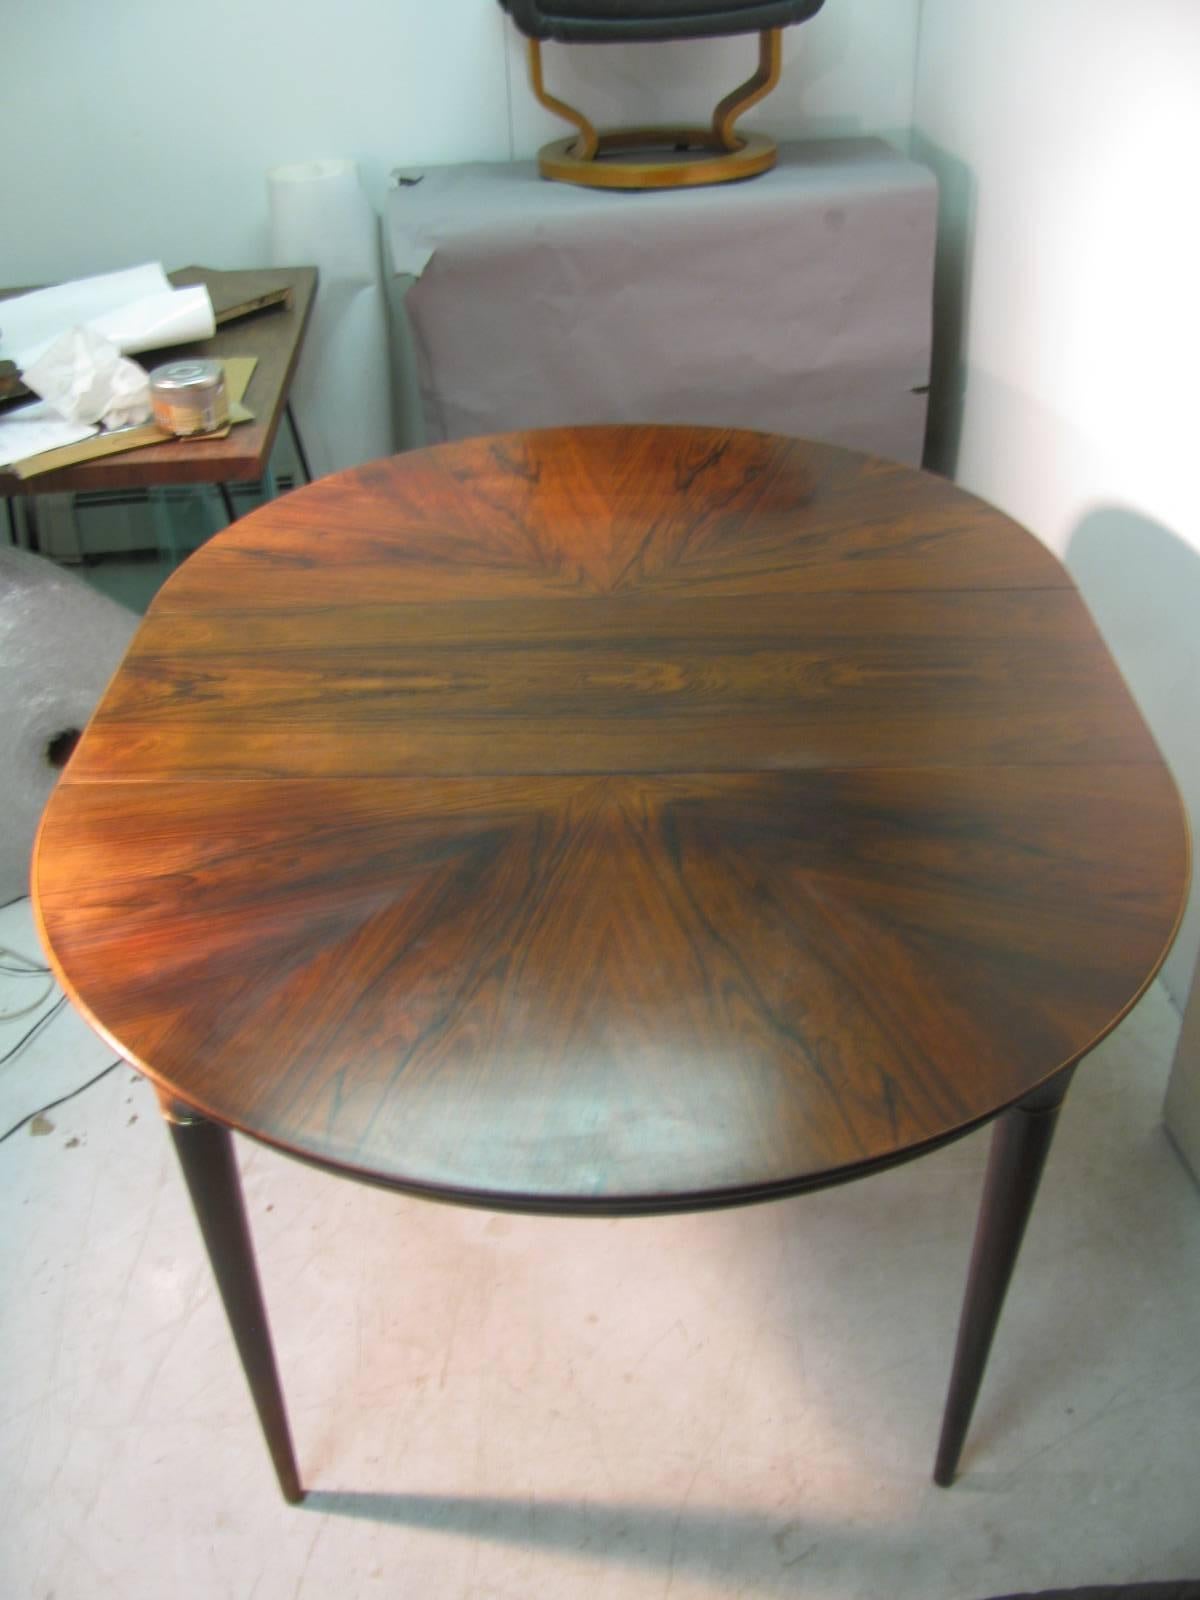 Swedish Midcentury Scandanavian Modern Rosewood Dining Room Table with Two Leaves